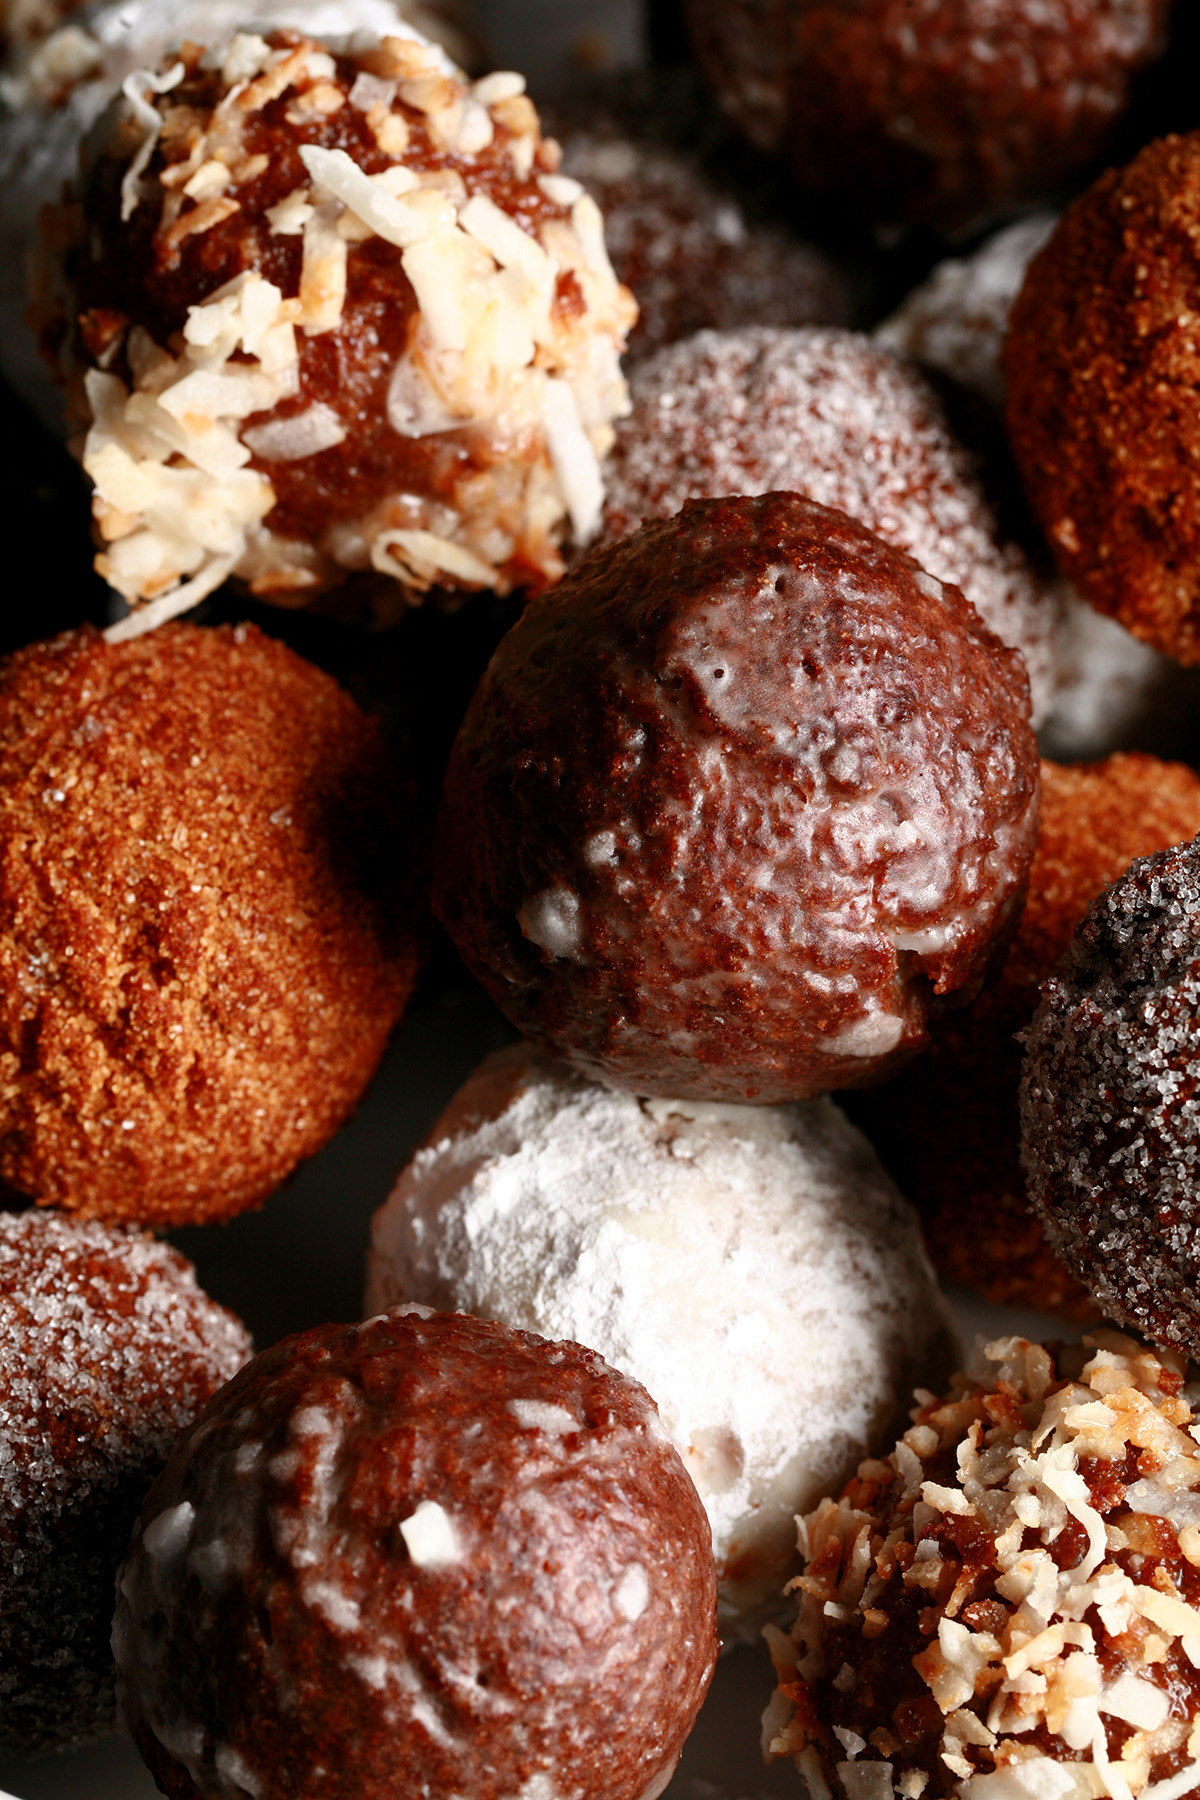 A close up view of an assortment of gluten-free timbits: Toasted coconut, chocolate glazed, cinnamon sugar, powdered sugar, and dutchie versions are all visible.